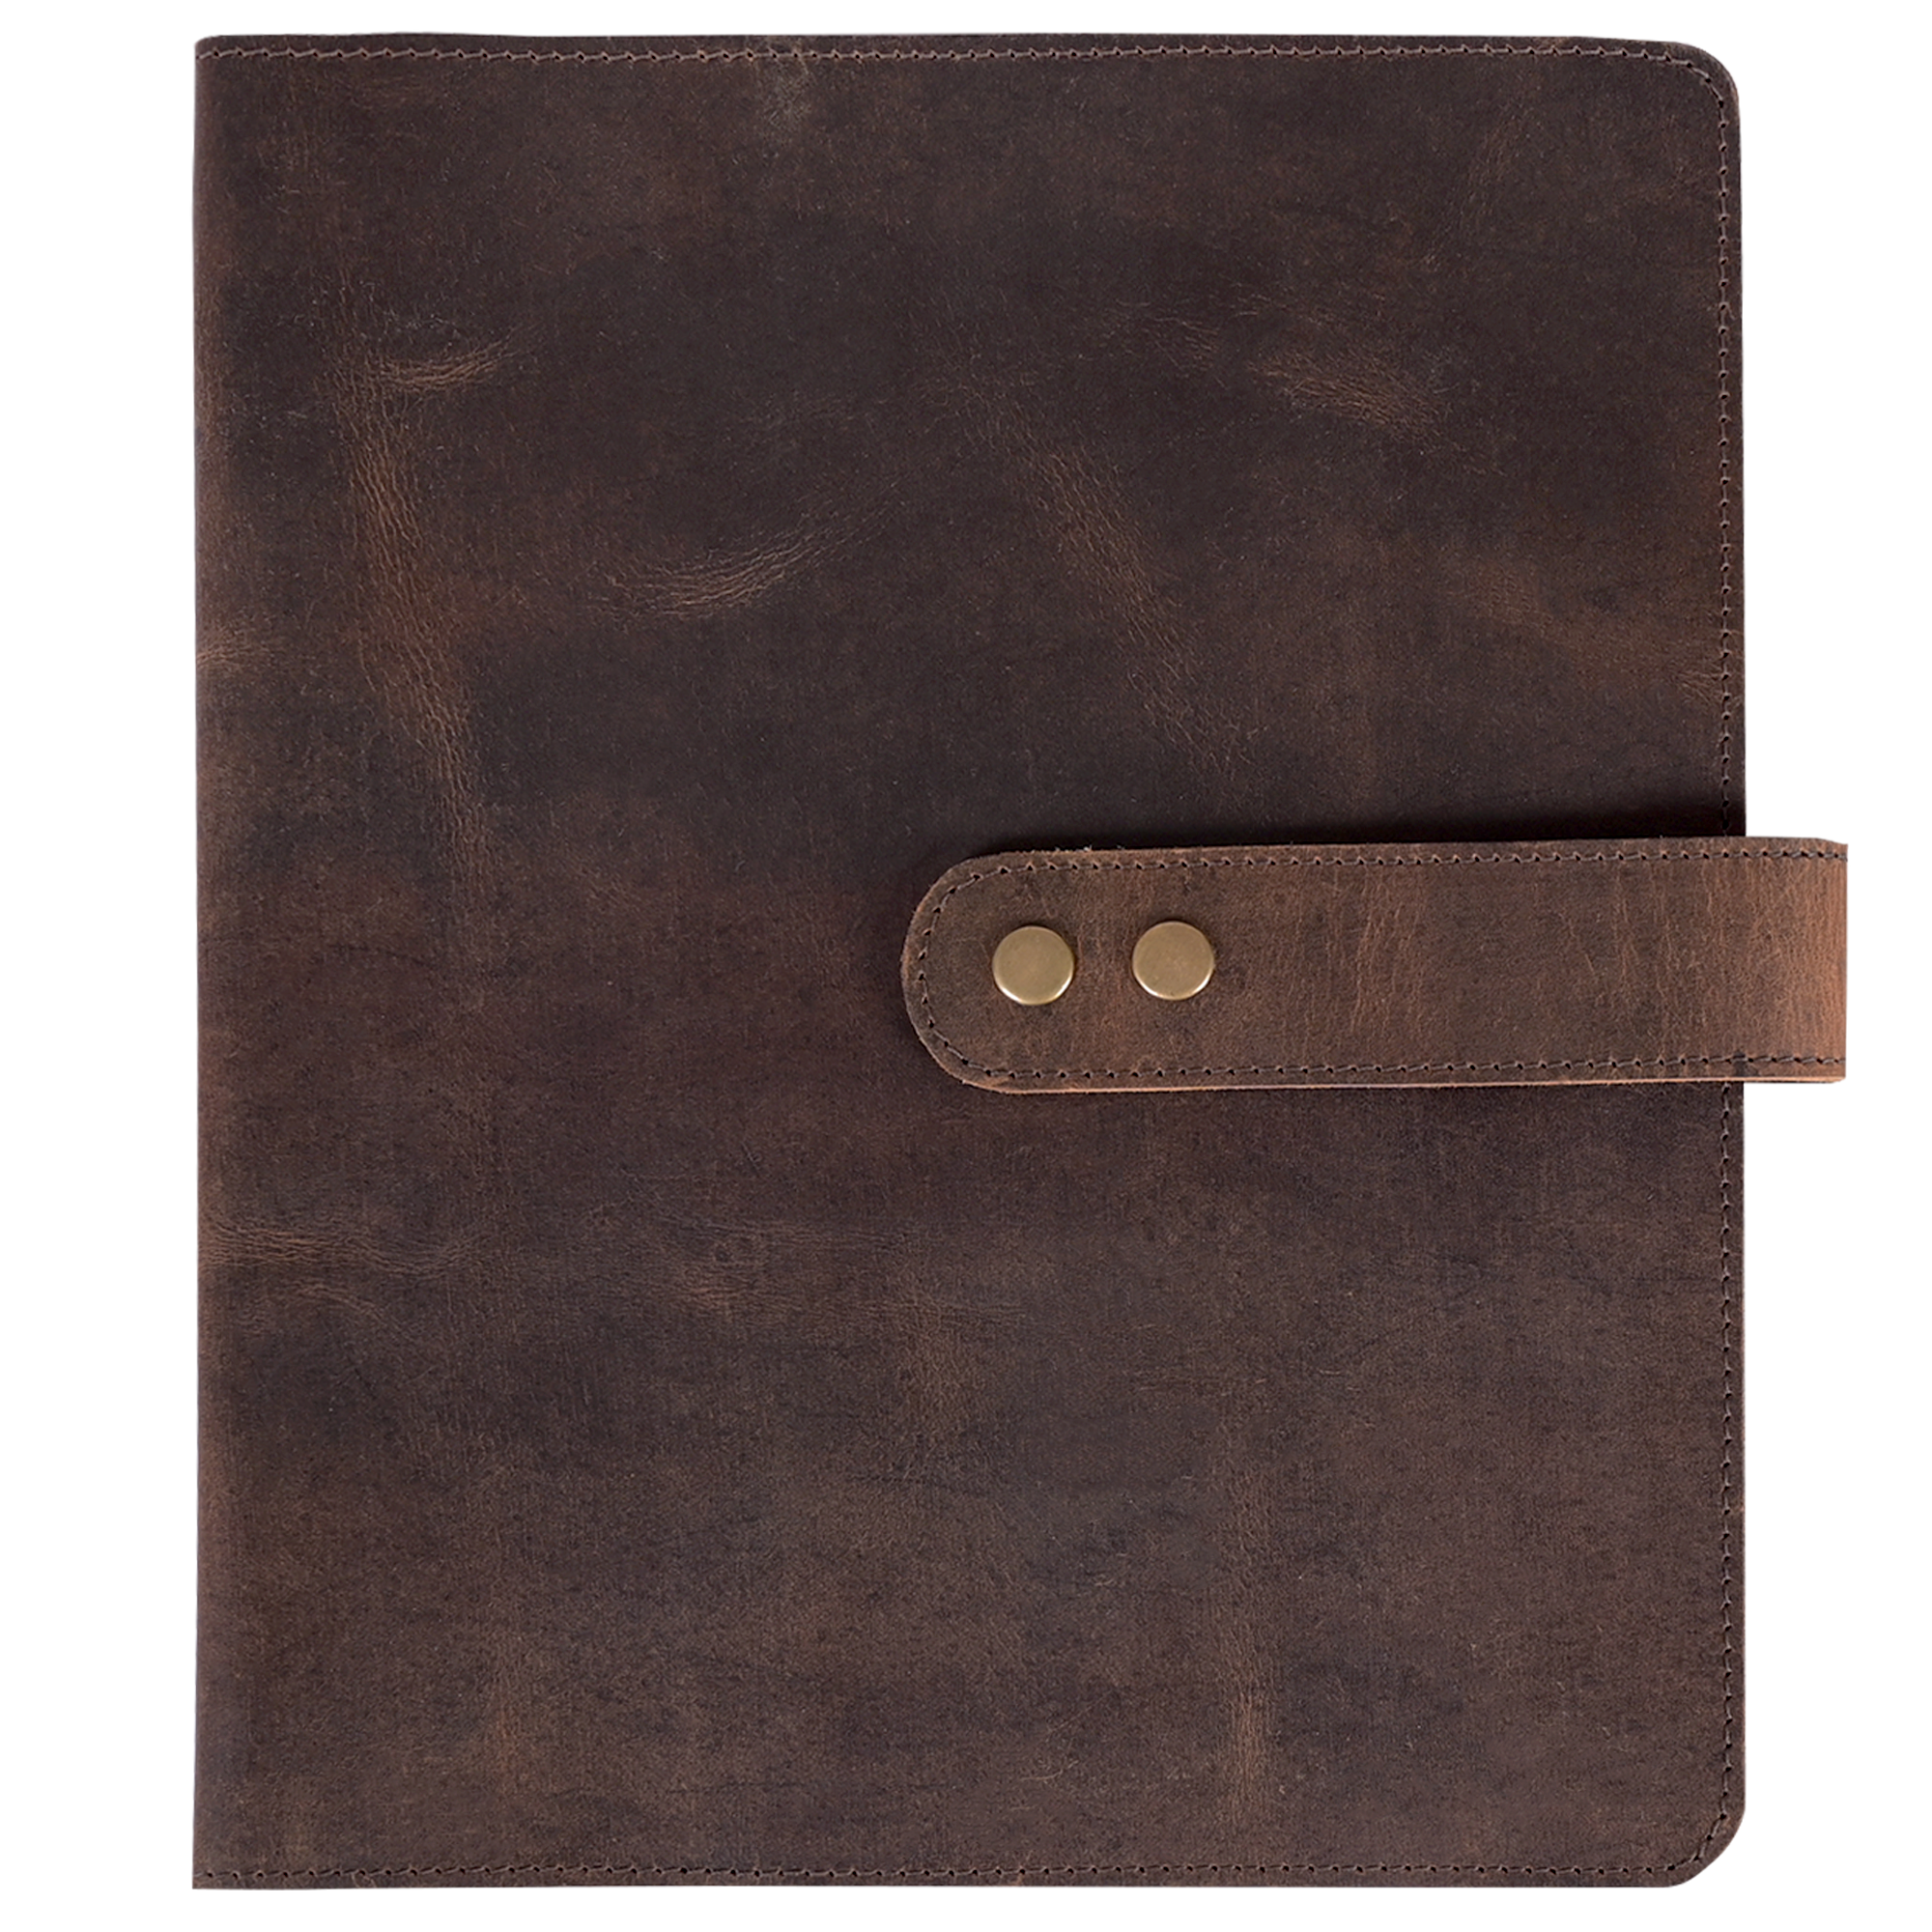 XL Leather Bible Cover